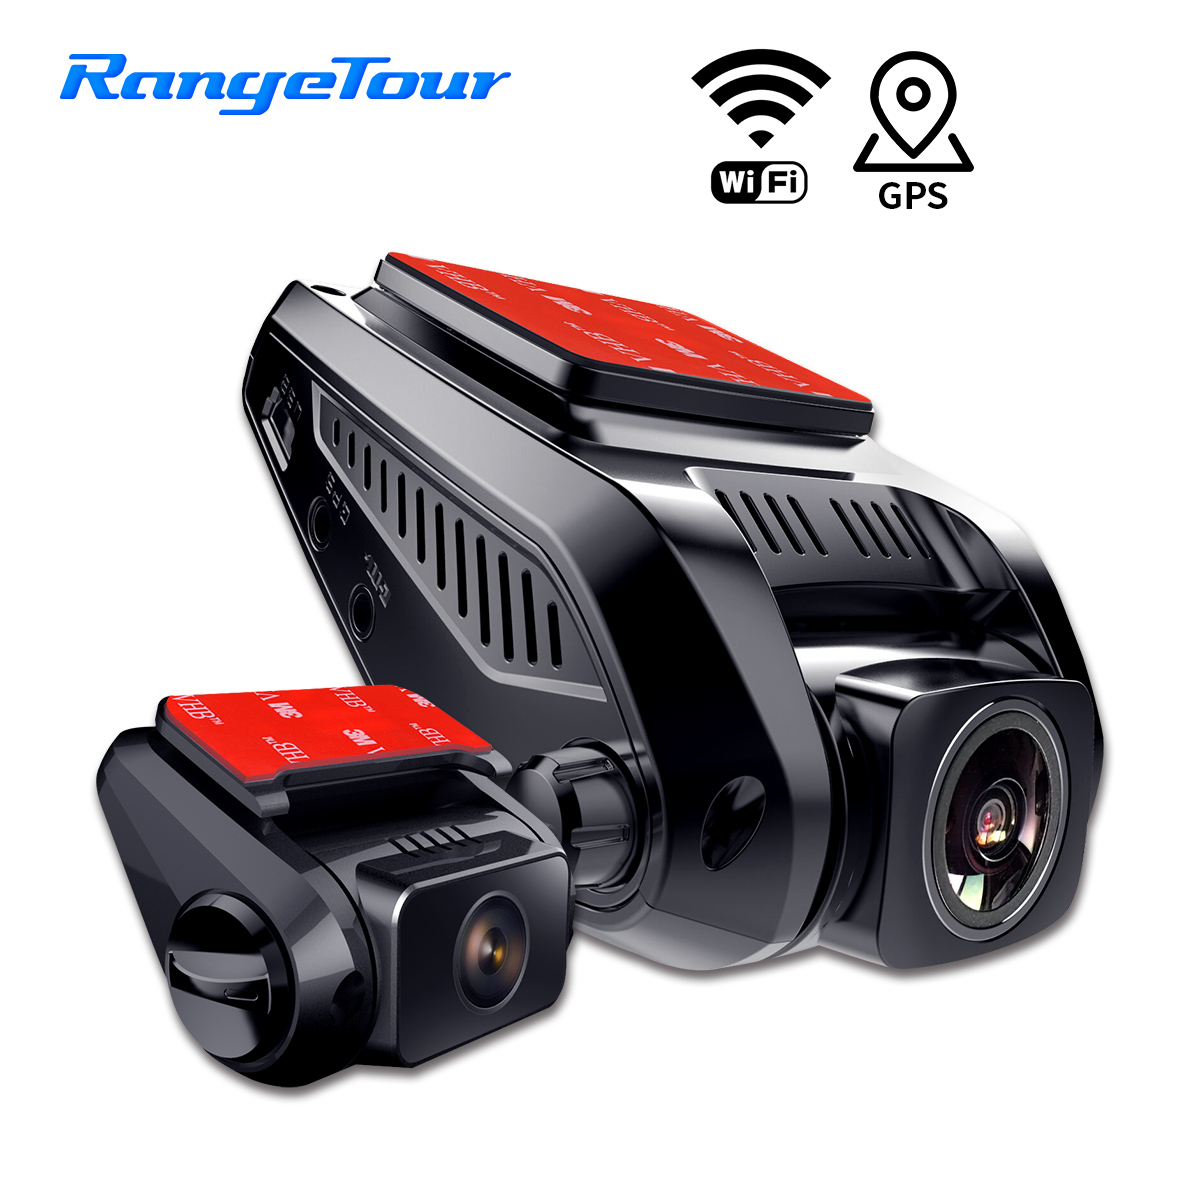 Car DVR Camera 4K 2160P Build In GPS WiFi ADAS Dash Cam Front and Rear Both 1080P Driving Recorder Motion Detection 24H Parking